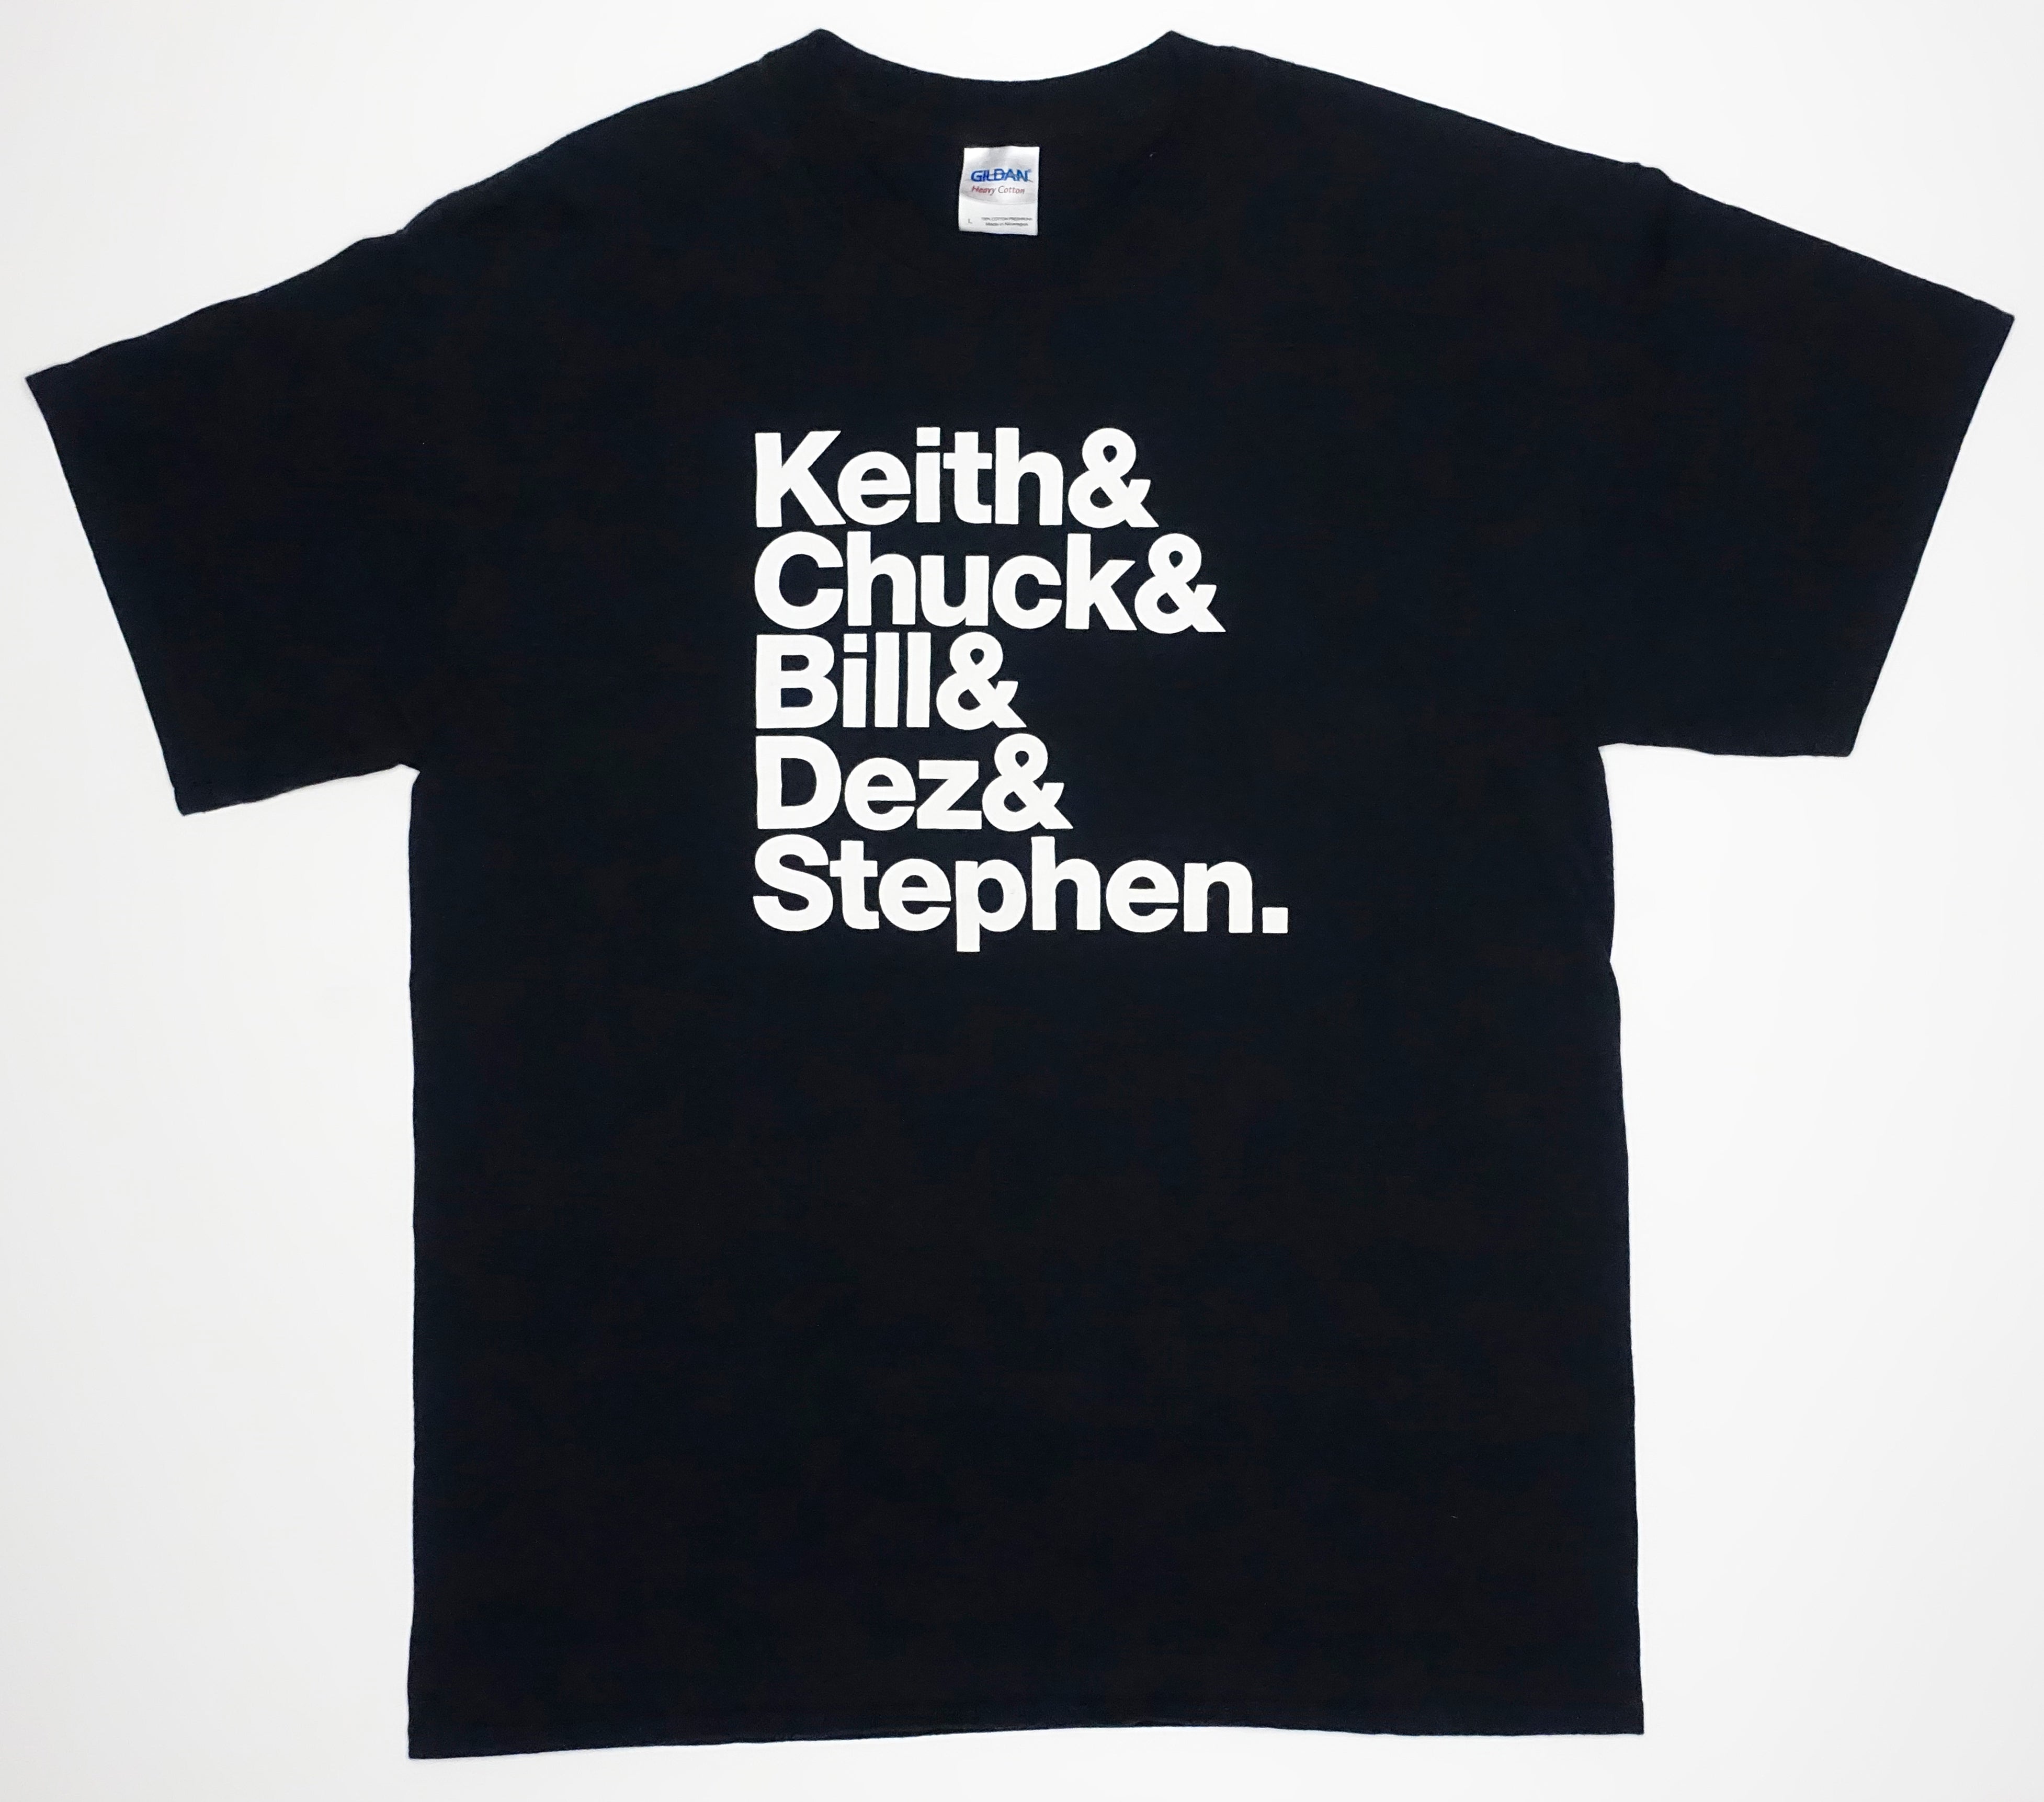 Flag - Keith & Chuck & Bill & Dez & Stephen Tour Shirt  (Bought At First Show Ever!) Size Large